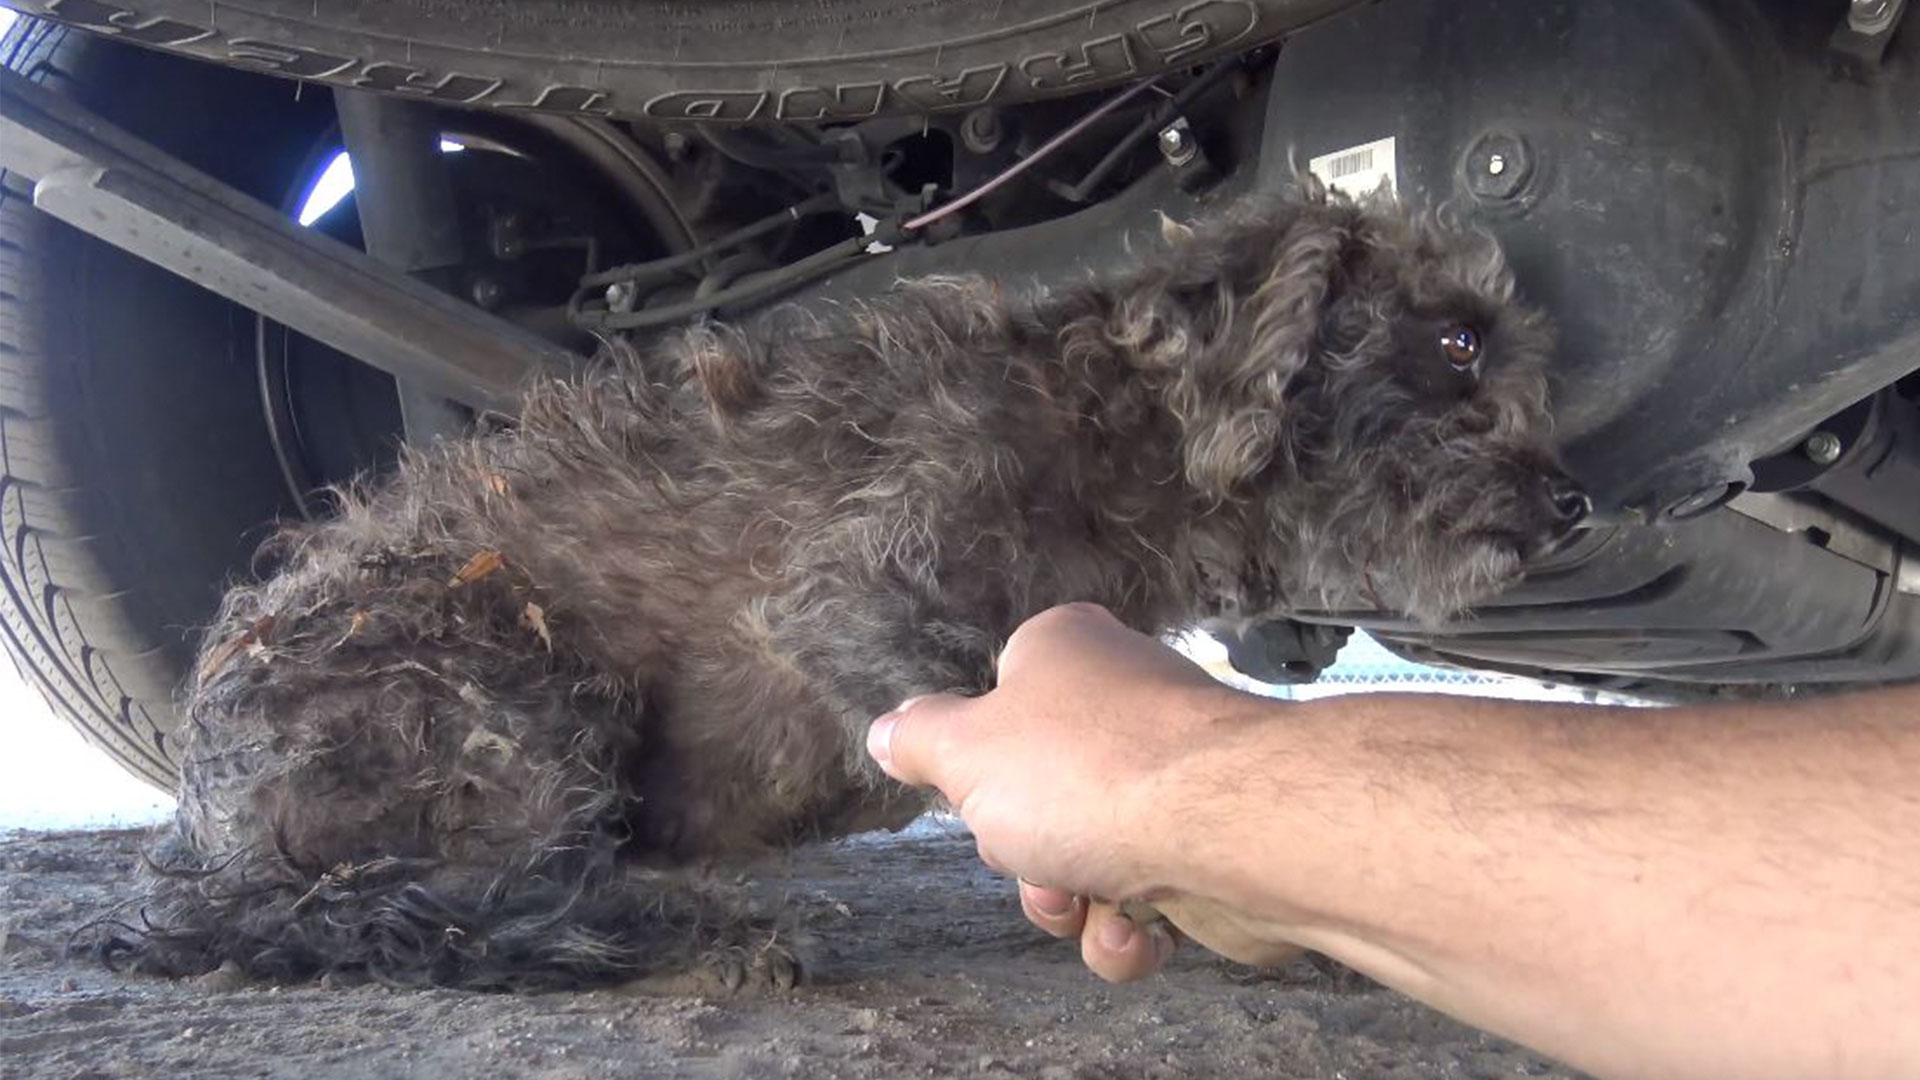 Rescuers Found A Stray Dog But It Refused To Leave, Soon They Found Out Why...